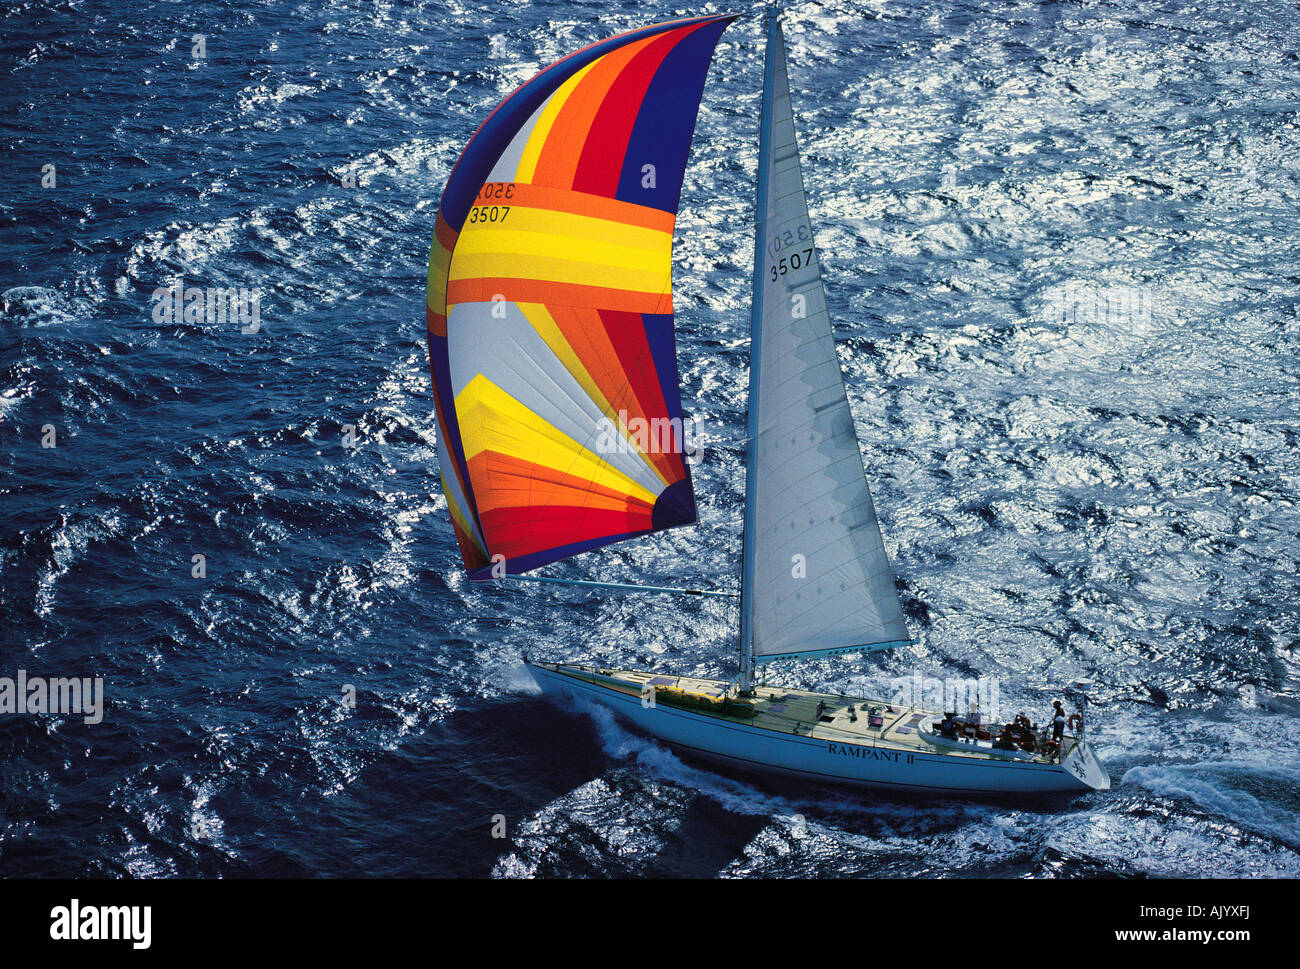 Australia.  New South Wales coast. Aerial side view of ocean going yacht with spinnaker sail during race. Rampant II. Stock Photo